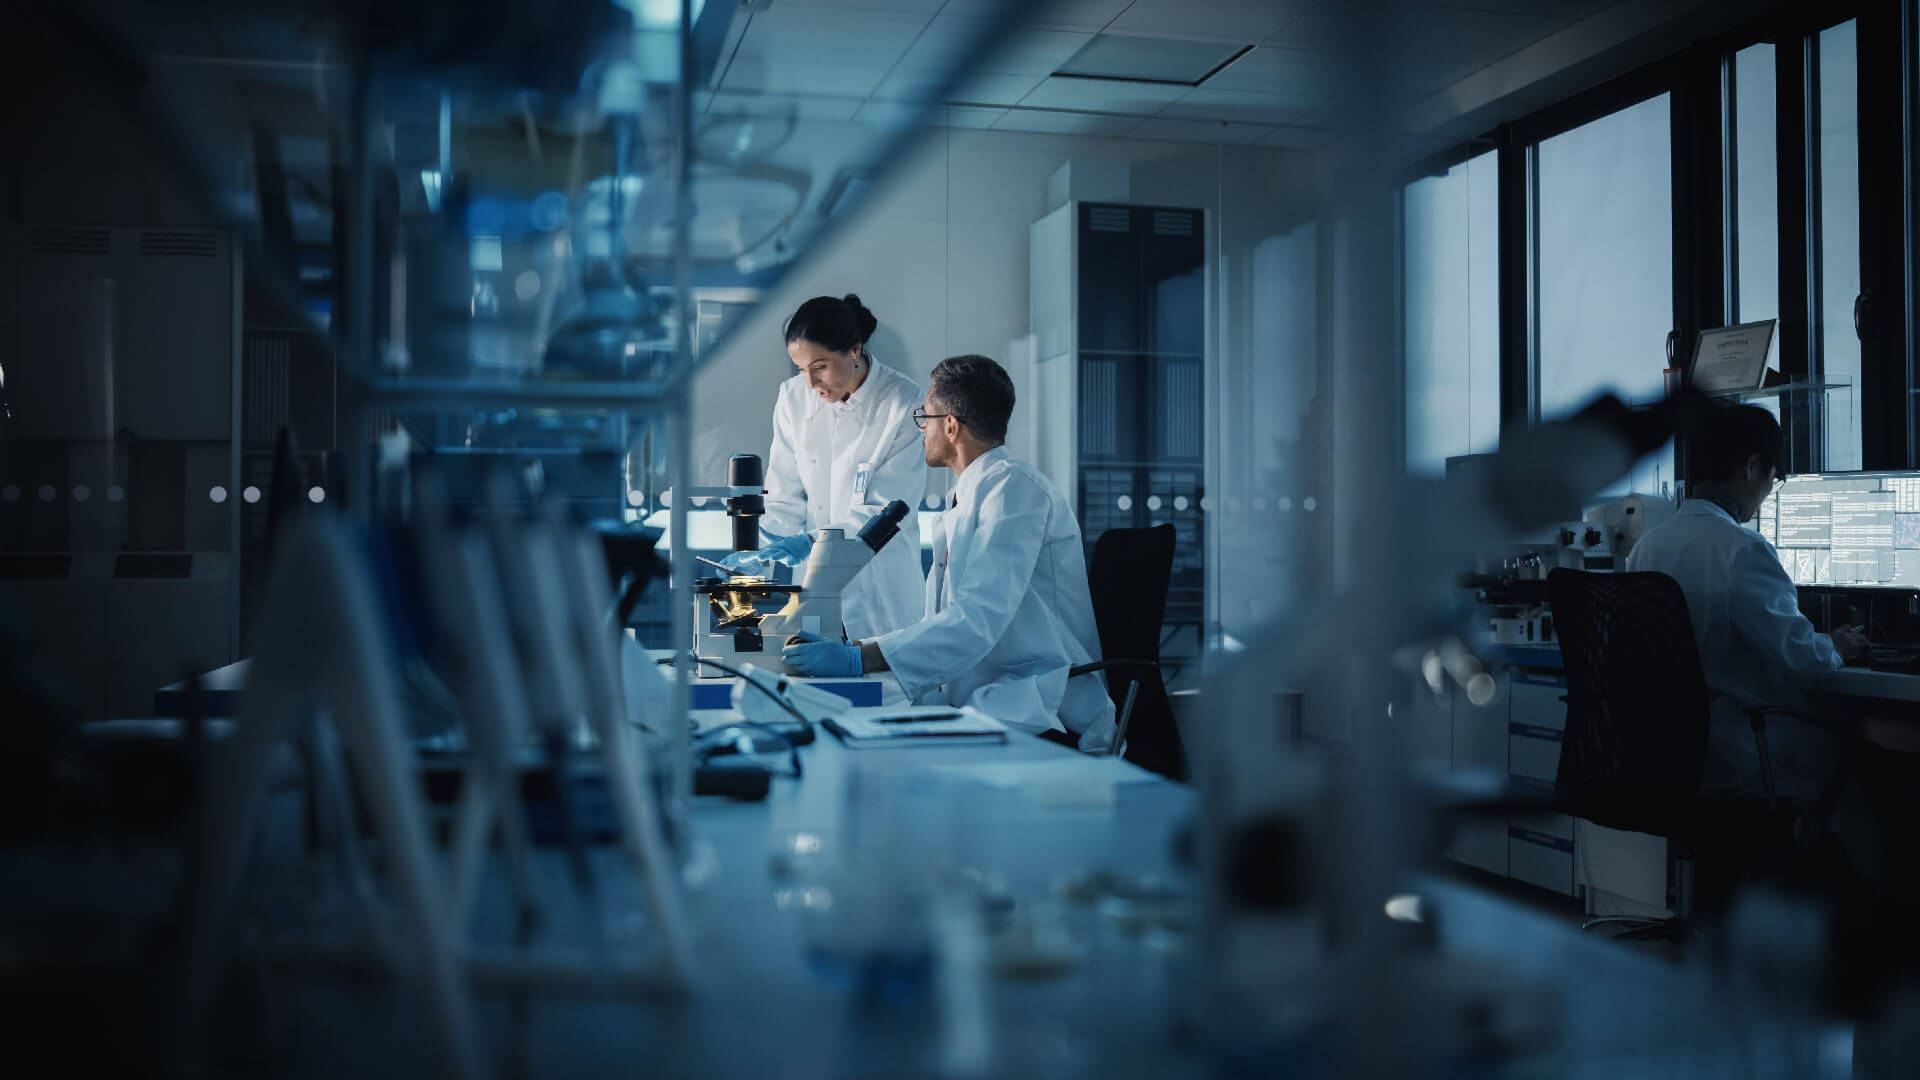 Modernizing Oracle Exadata to Azure Synapse for a leading Biopharmaceutical Firm